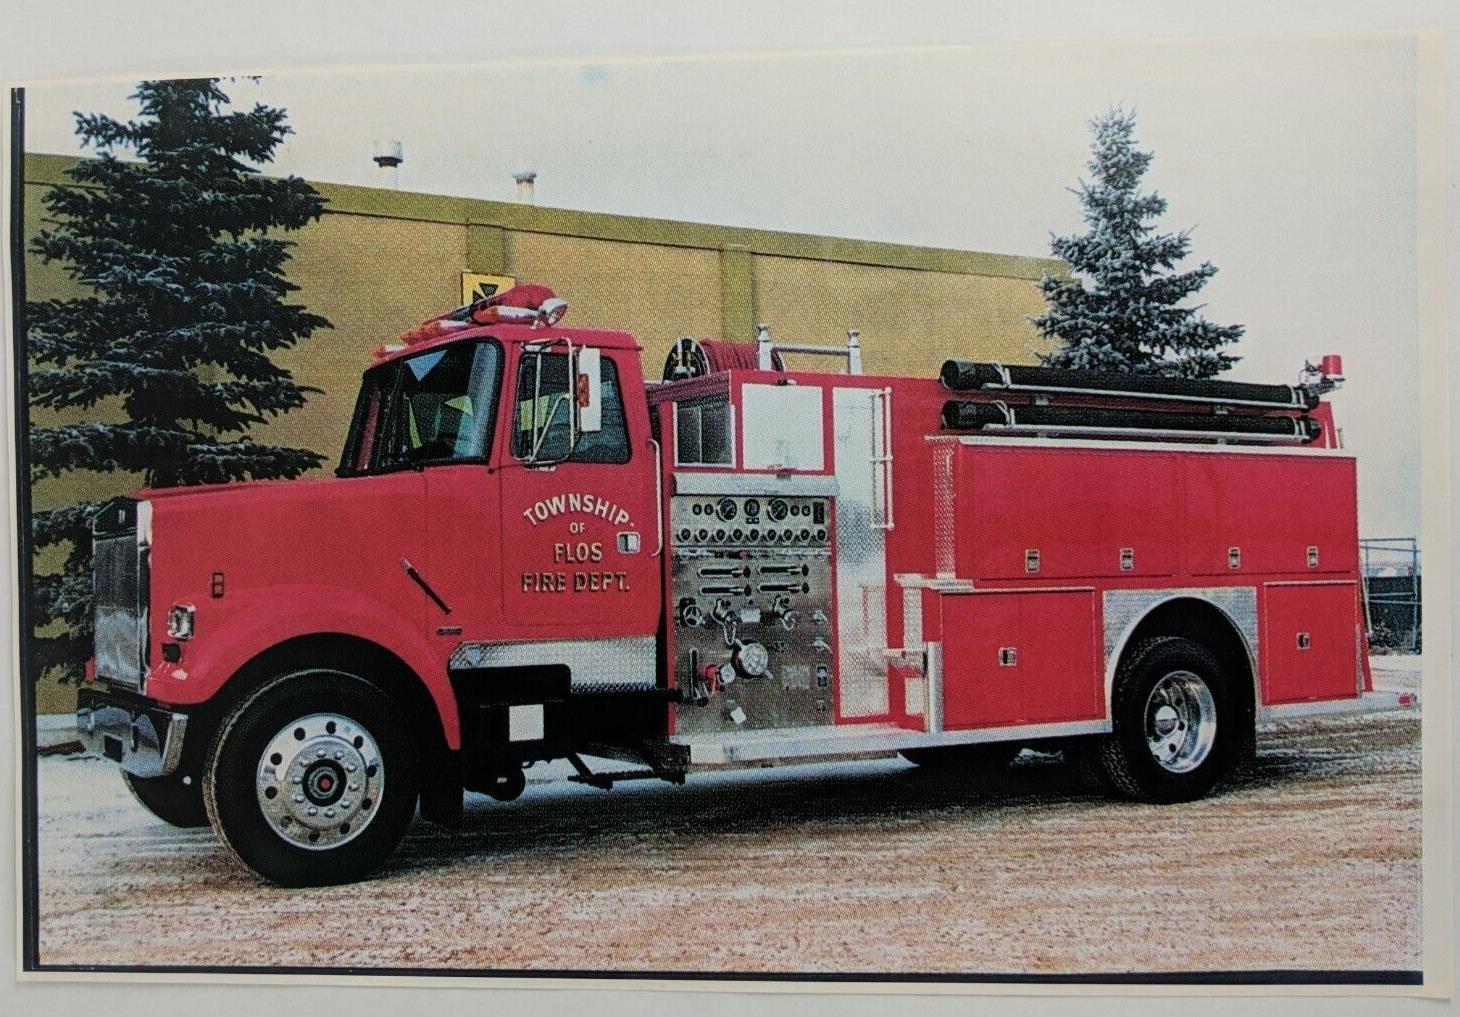 Vintage Firetruck Photo Print, Large 17x11, Township of Flos Fire Dept. Red